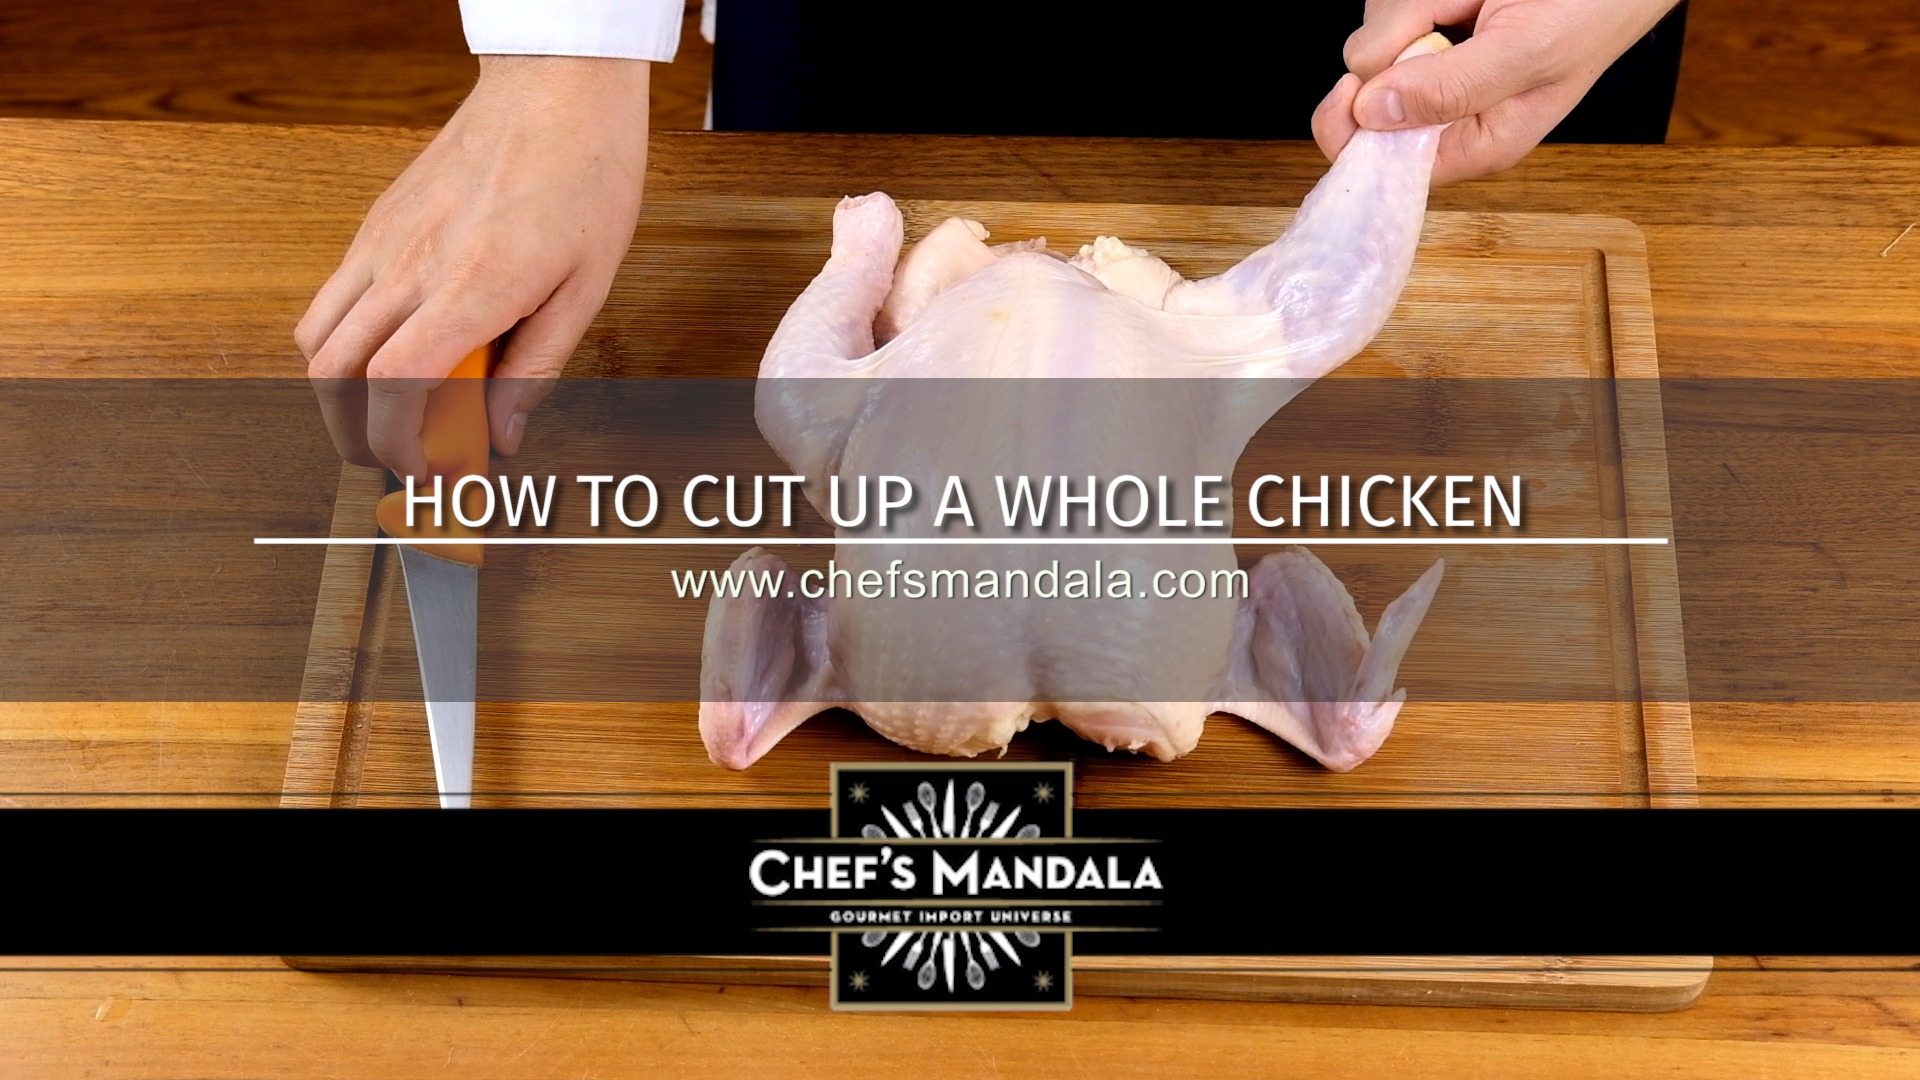 HOW TO CUT UP A WHOLE CHICKEN